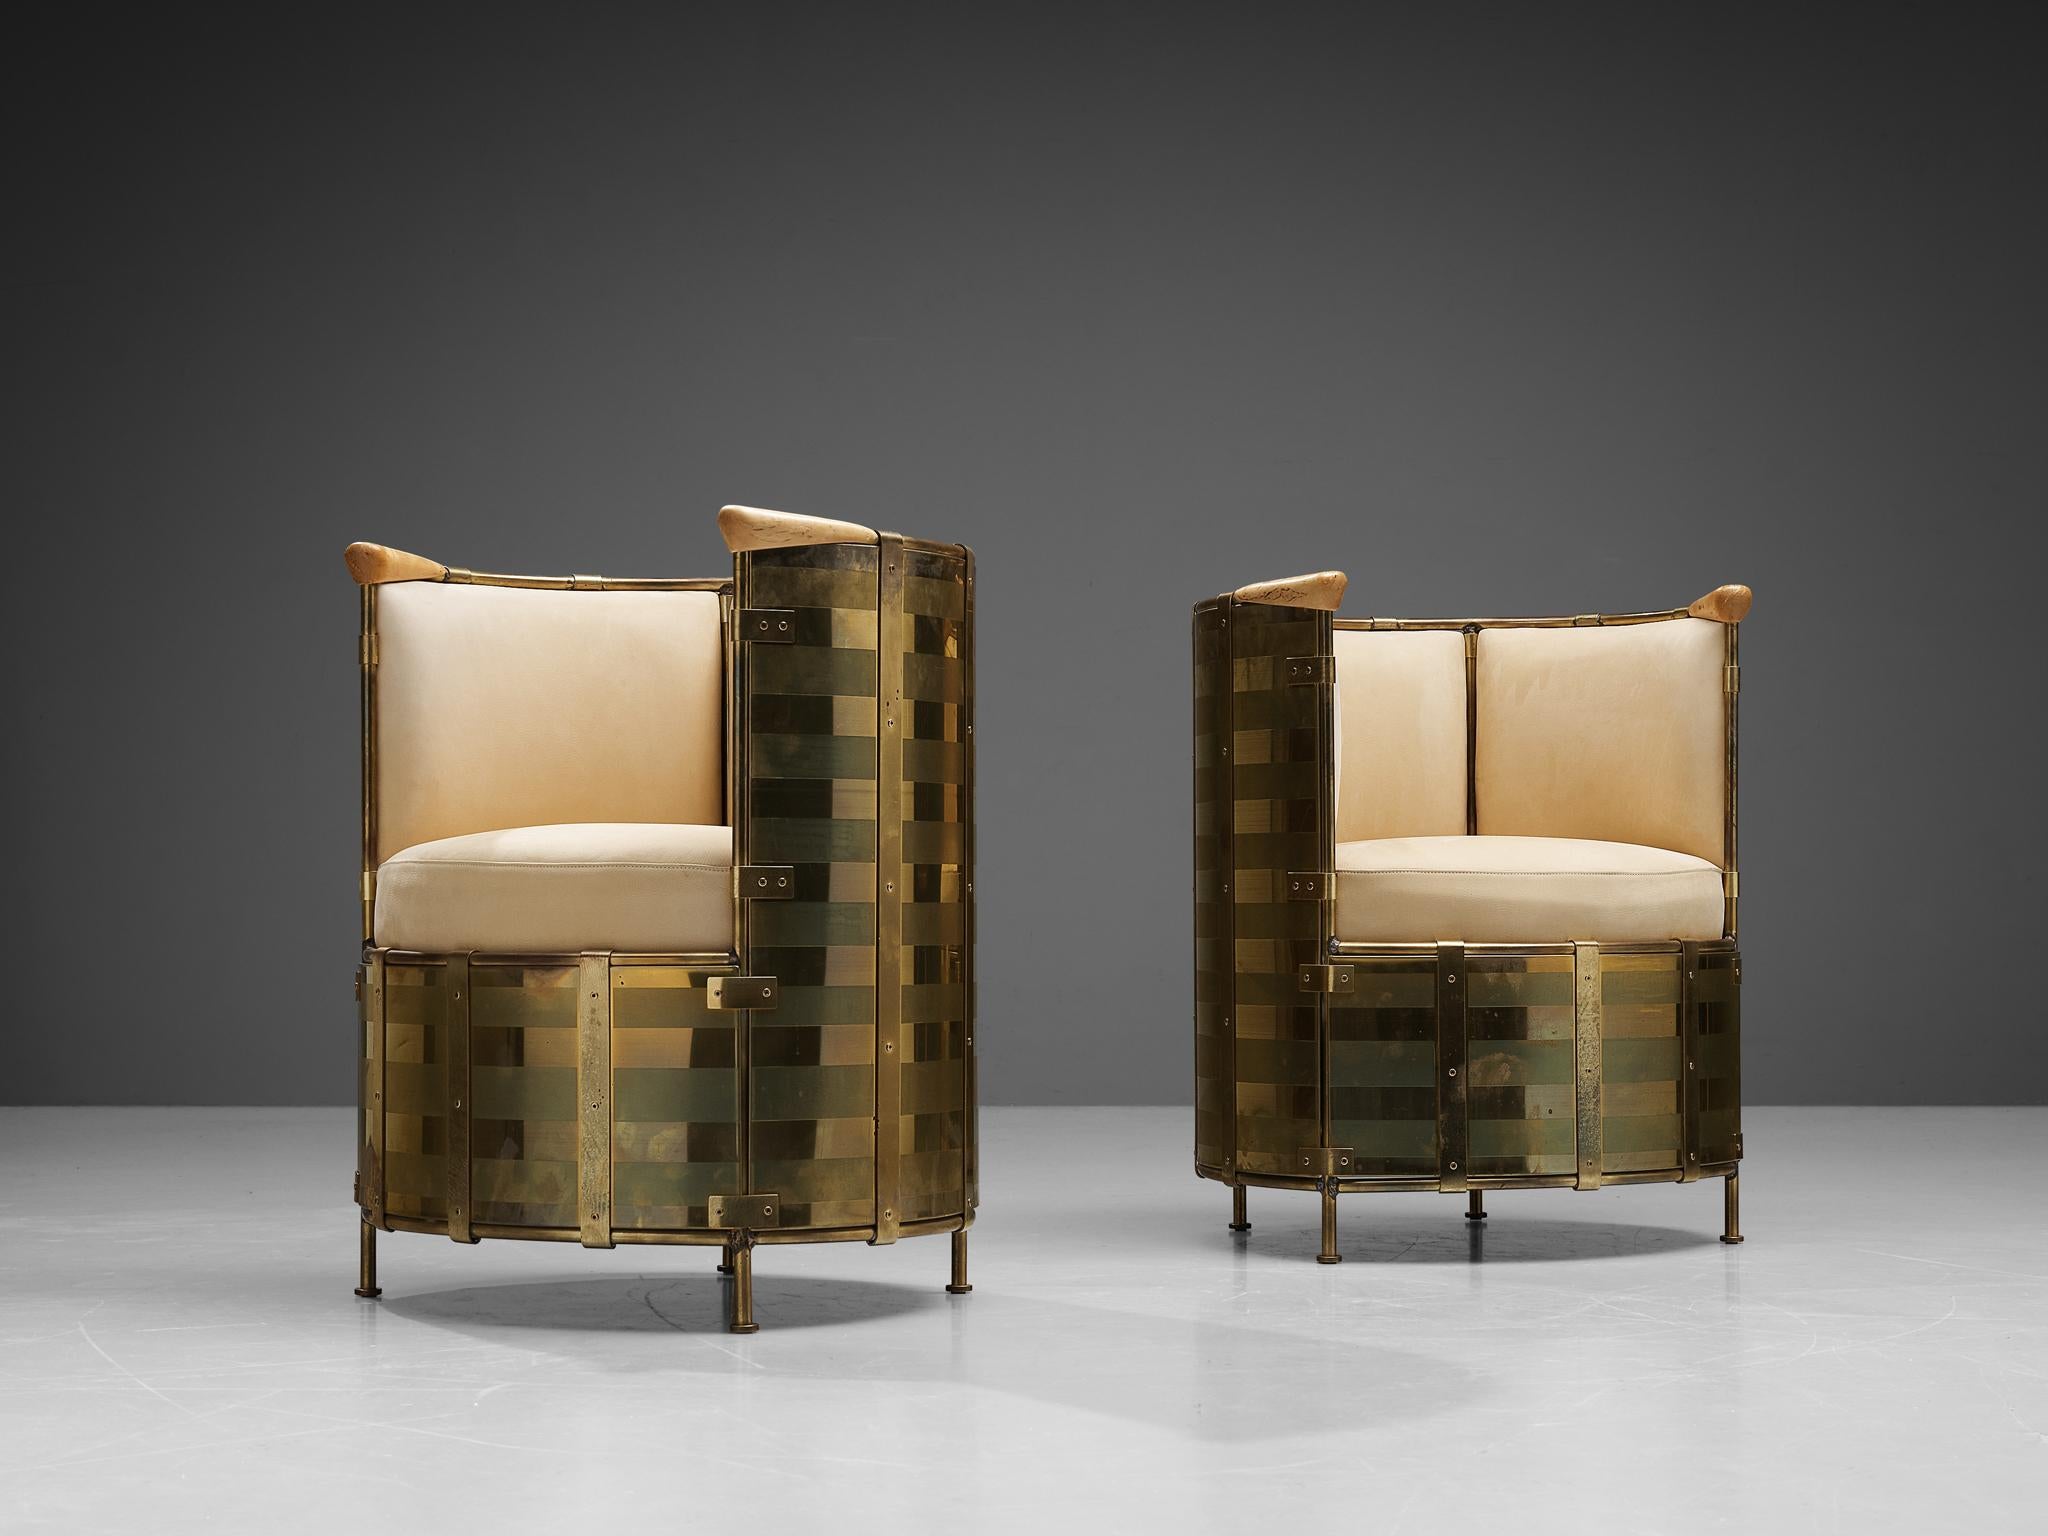 Mats Theselius for Källemo AB, easy chairs 'El Dorado no. 7 & 8 out of 360, brass, birch, leather, Sweden, 2002.

This 'El Dorado' easy chair by Mats Theselius was designed in 2002 for the 11th anniversary of the earlier edition called the 'Elk